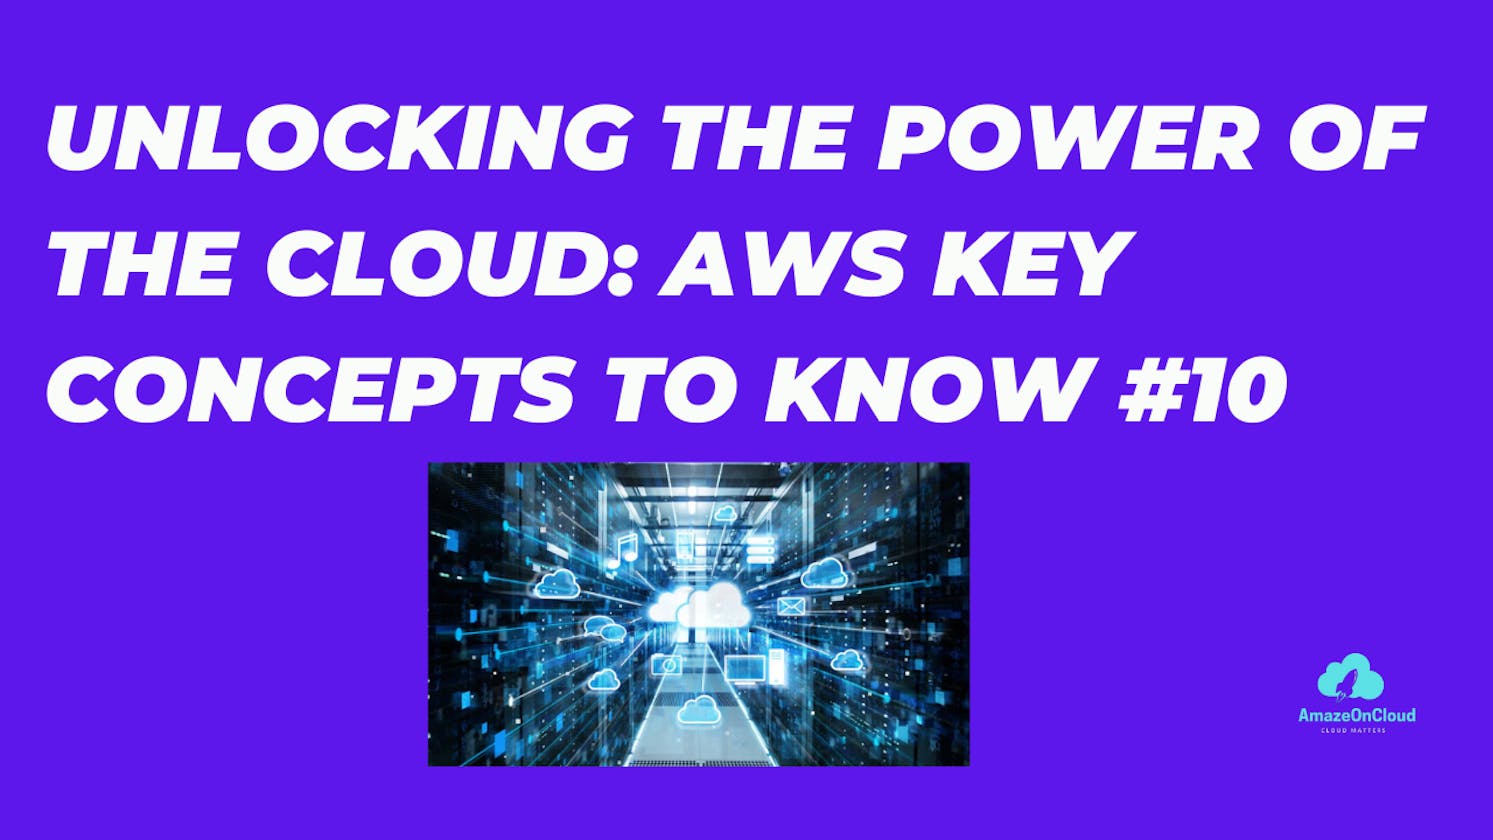 Unlocking the Power of the Cloud: AWS Key concepts to know #10